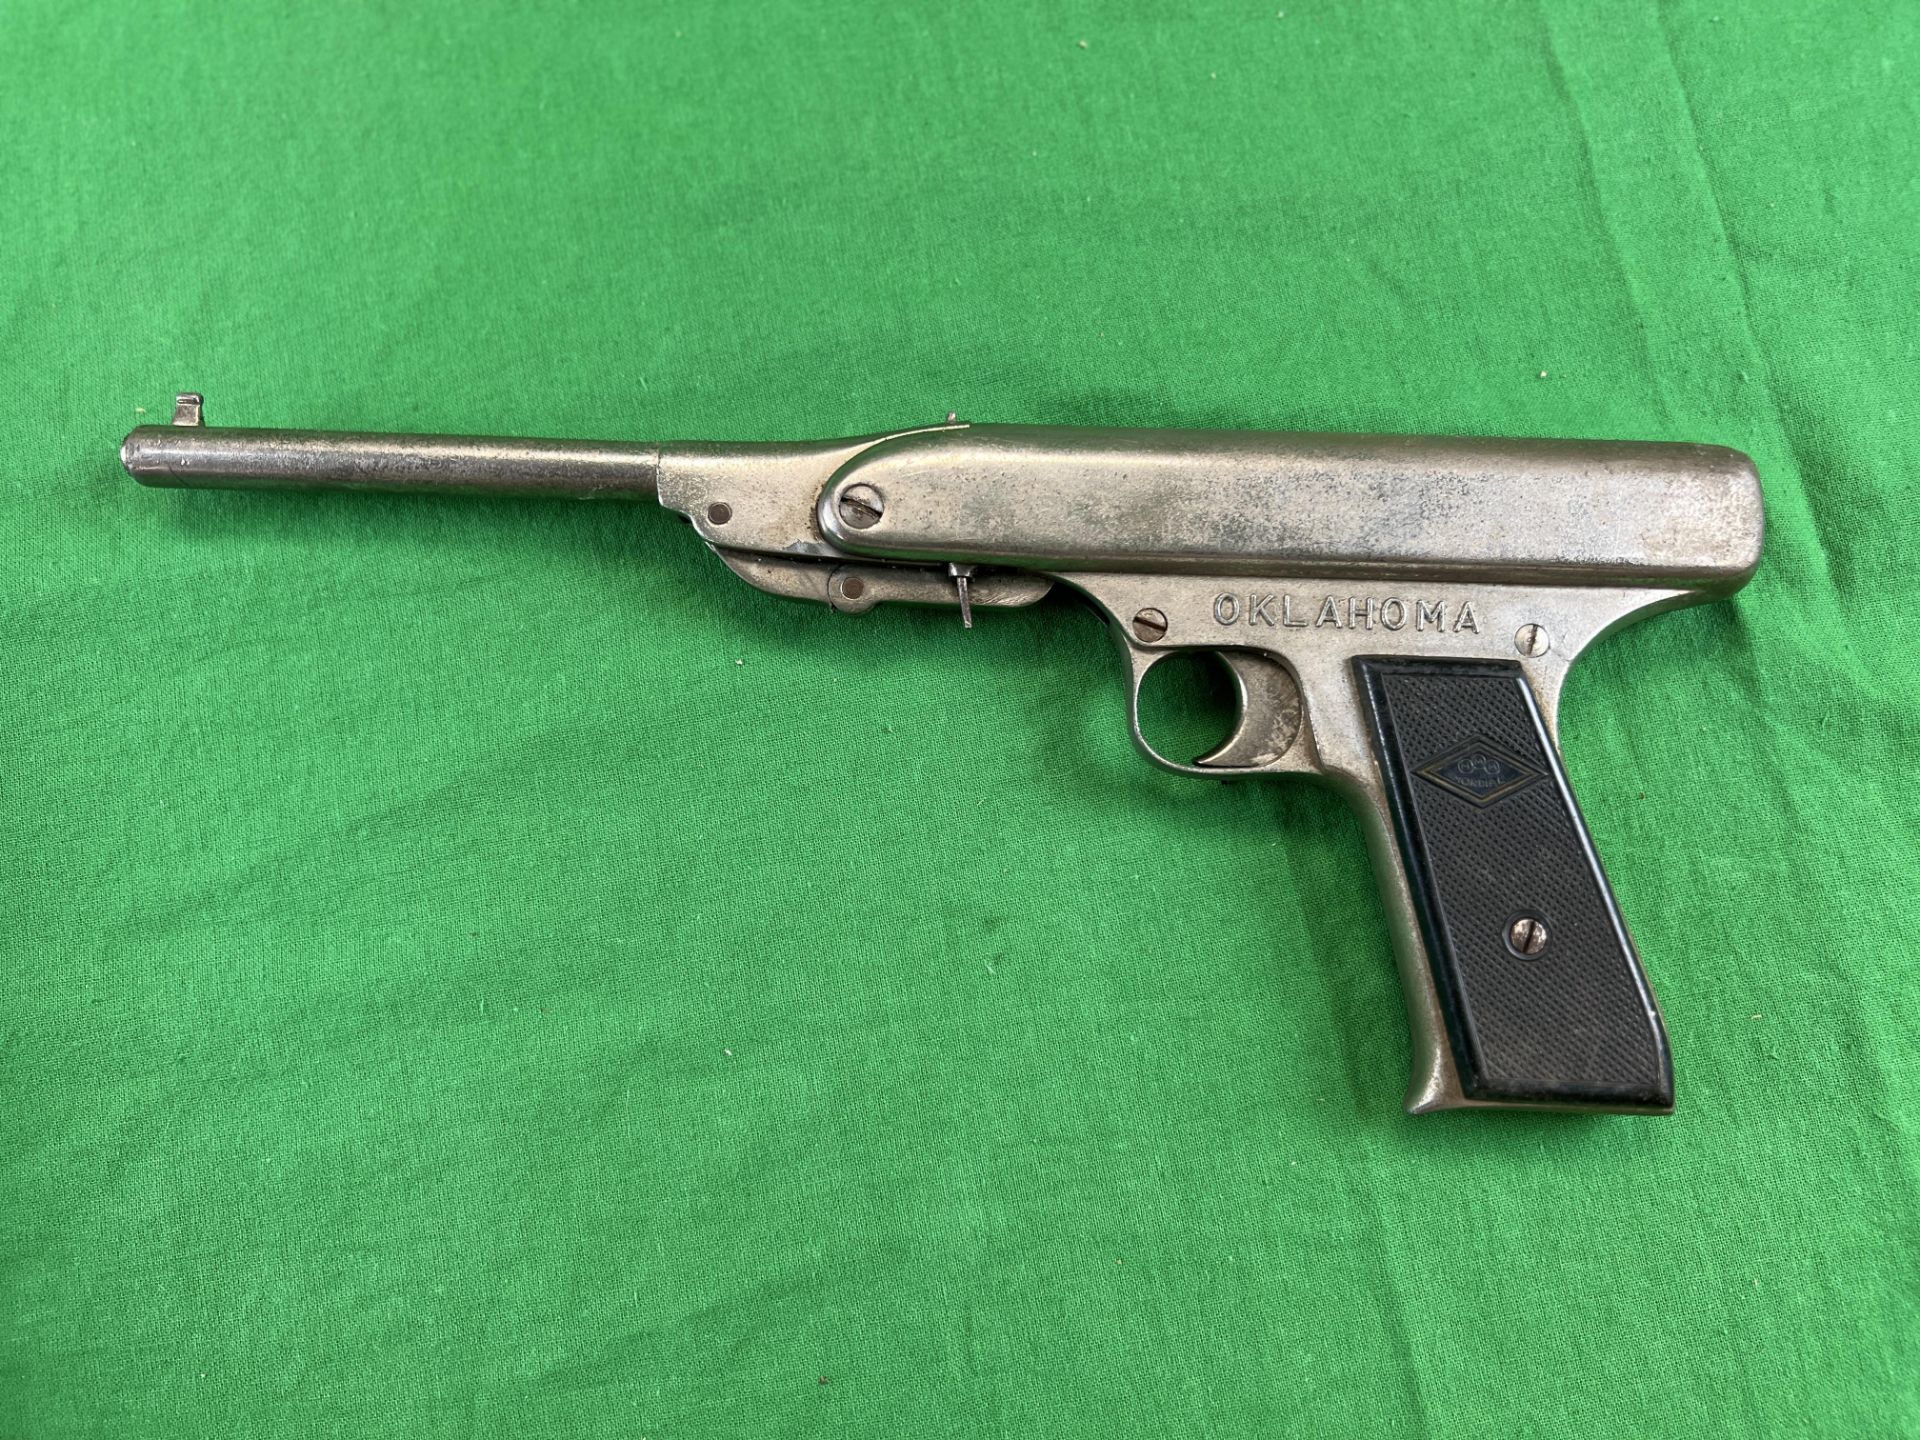 OKLAHOMA MONDIAL VINTAGE ITALIAN AIR PISTOL - NO POSTAGE OR PACKING AVAILABLE - Image 6 of 9